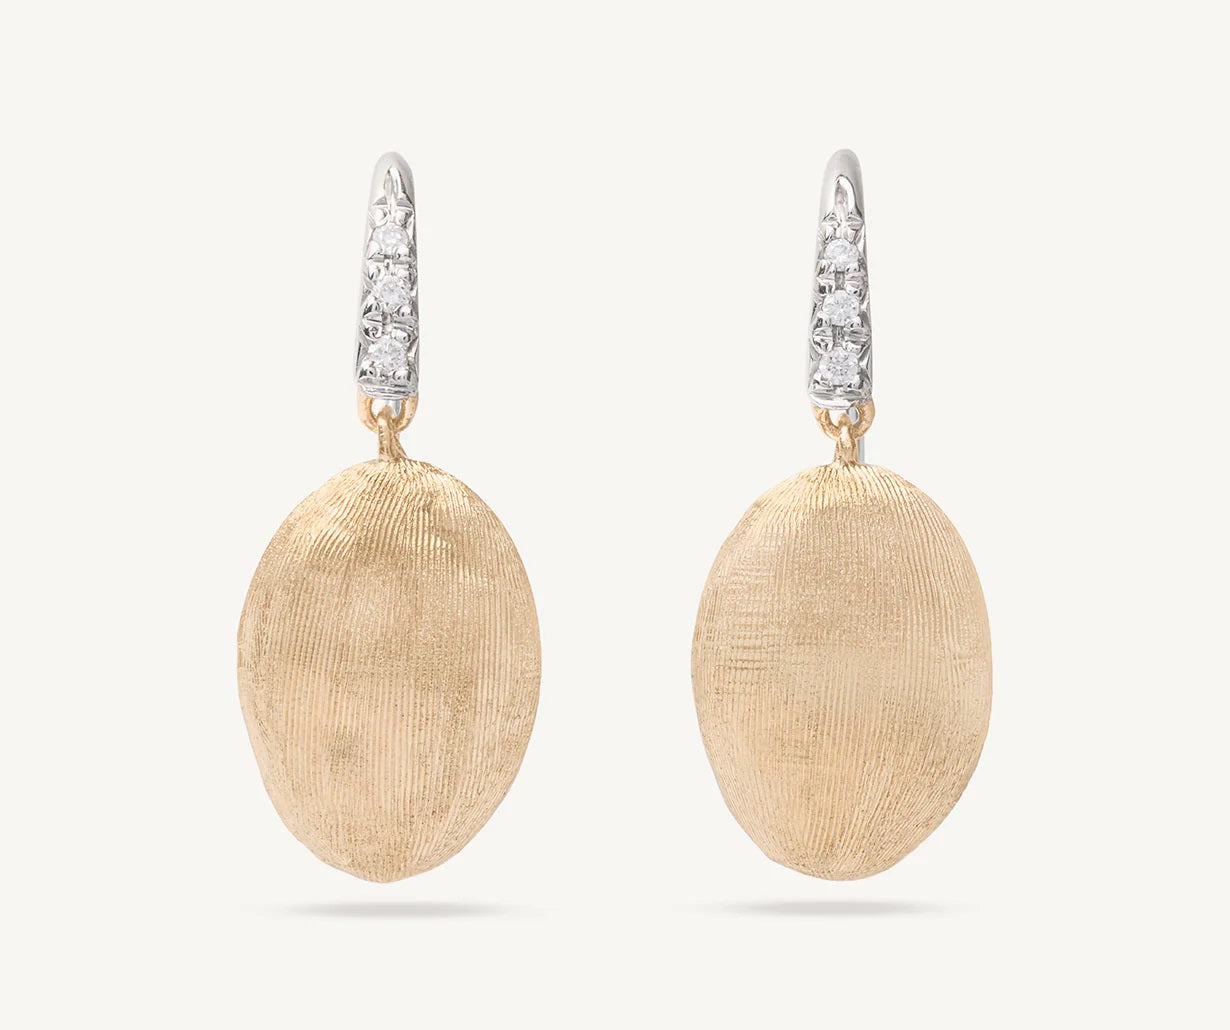 18K YELLOW GOLD & DIAMOND DROP EARRINGS FROM THE SIVIGLIA COLLECTION